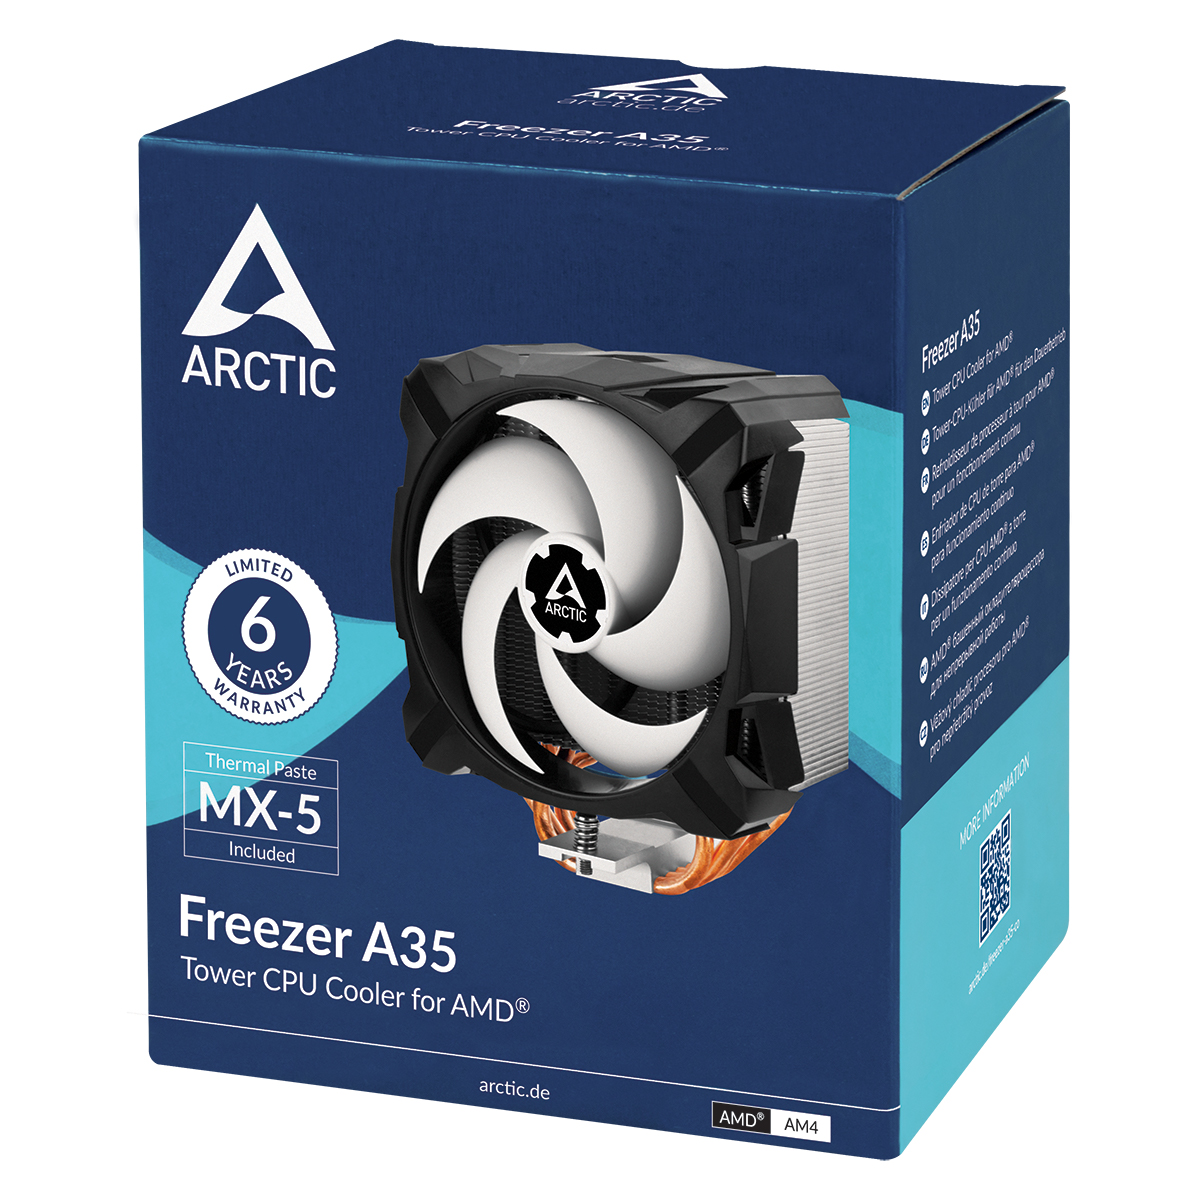 DISSIPATORE ARCTIC FREEZER A35 AMD AM4 AM5 ACFRE00112A - Pc Frog %